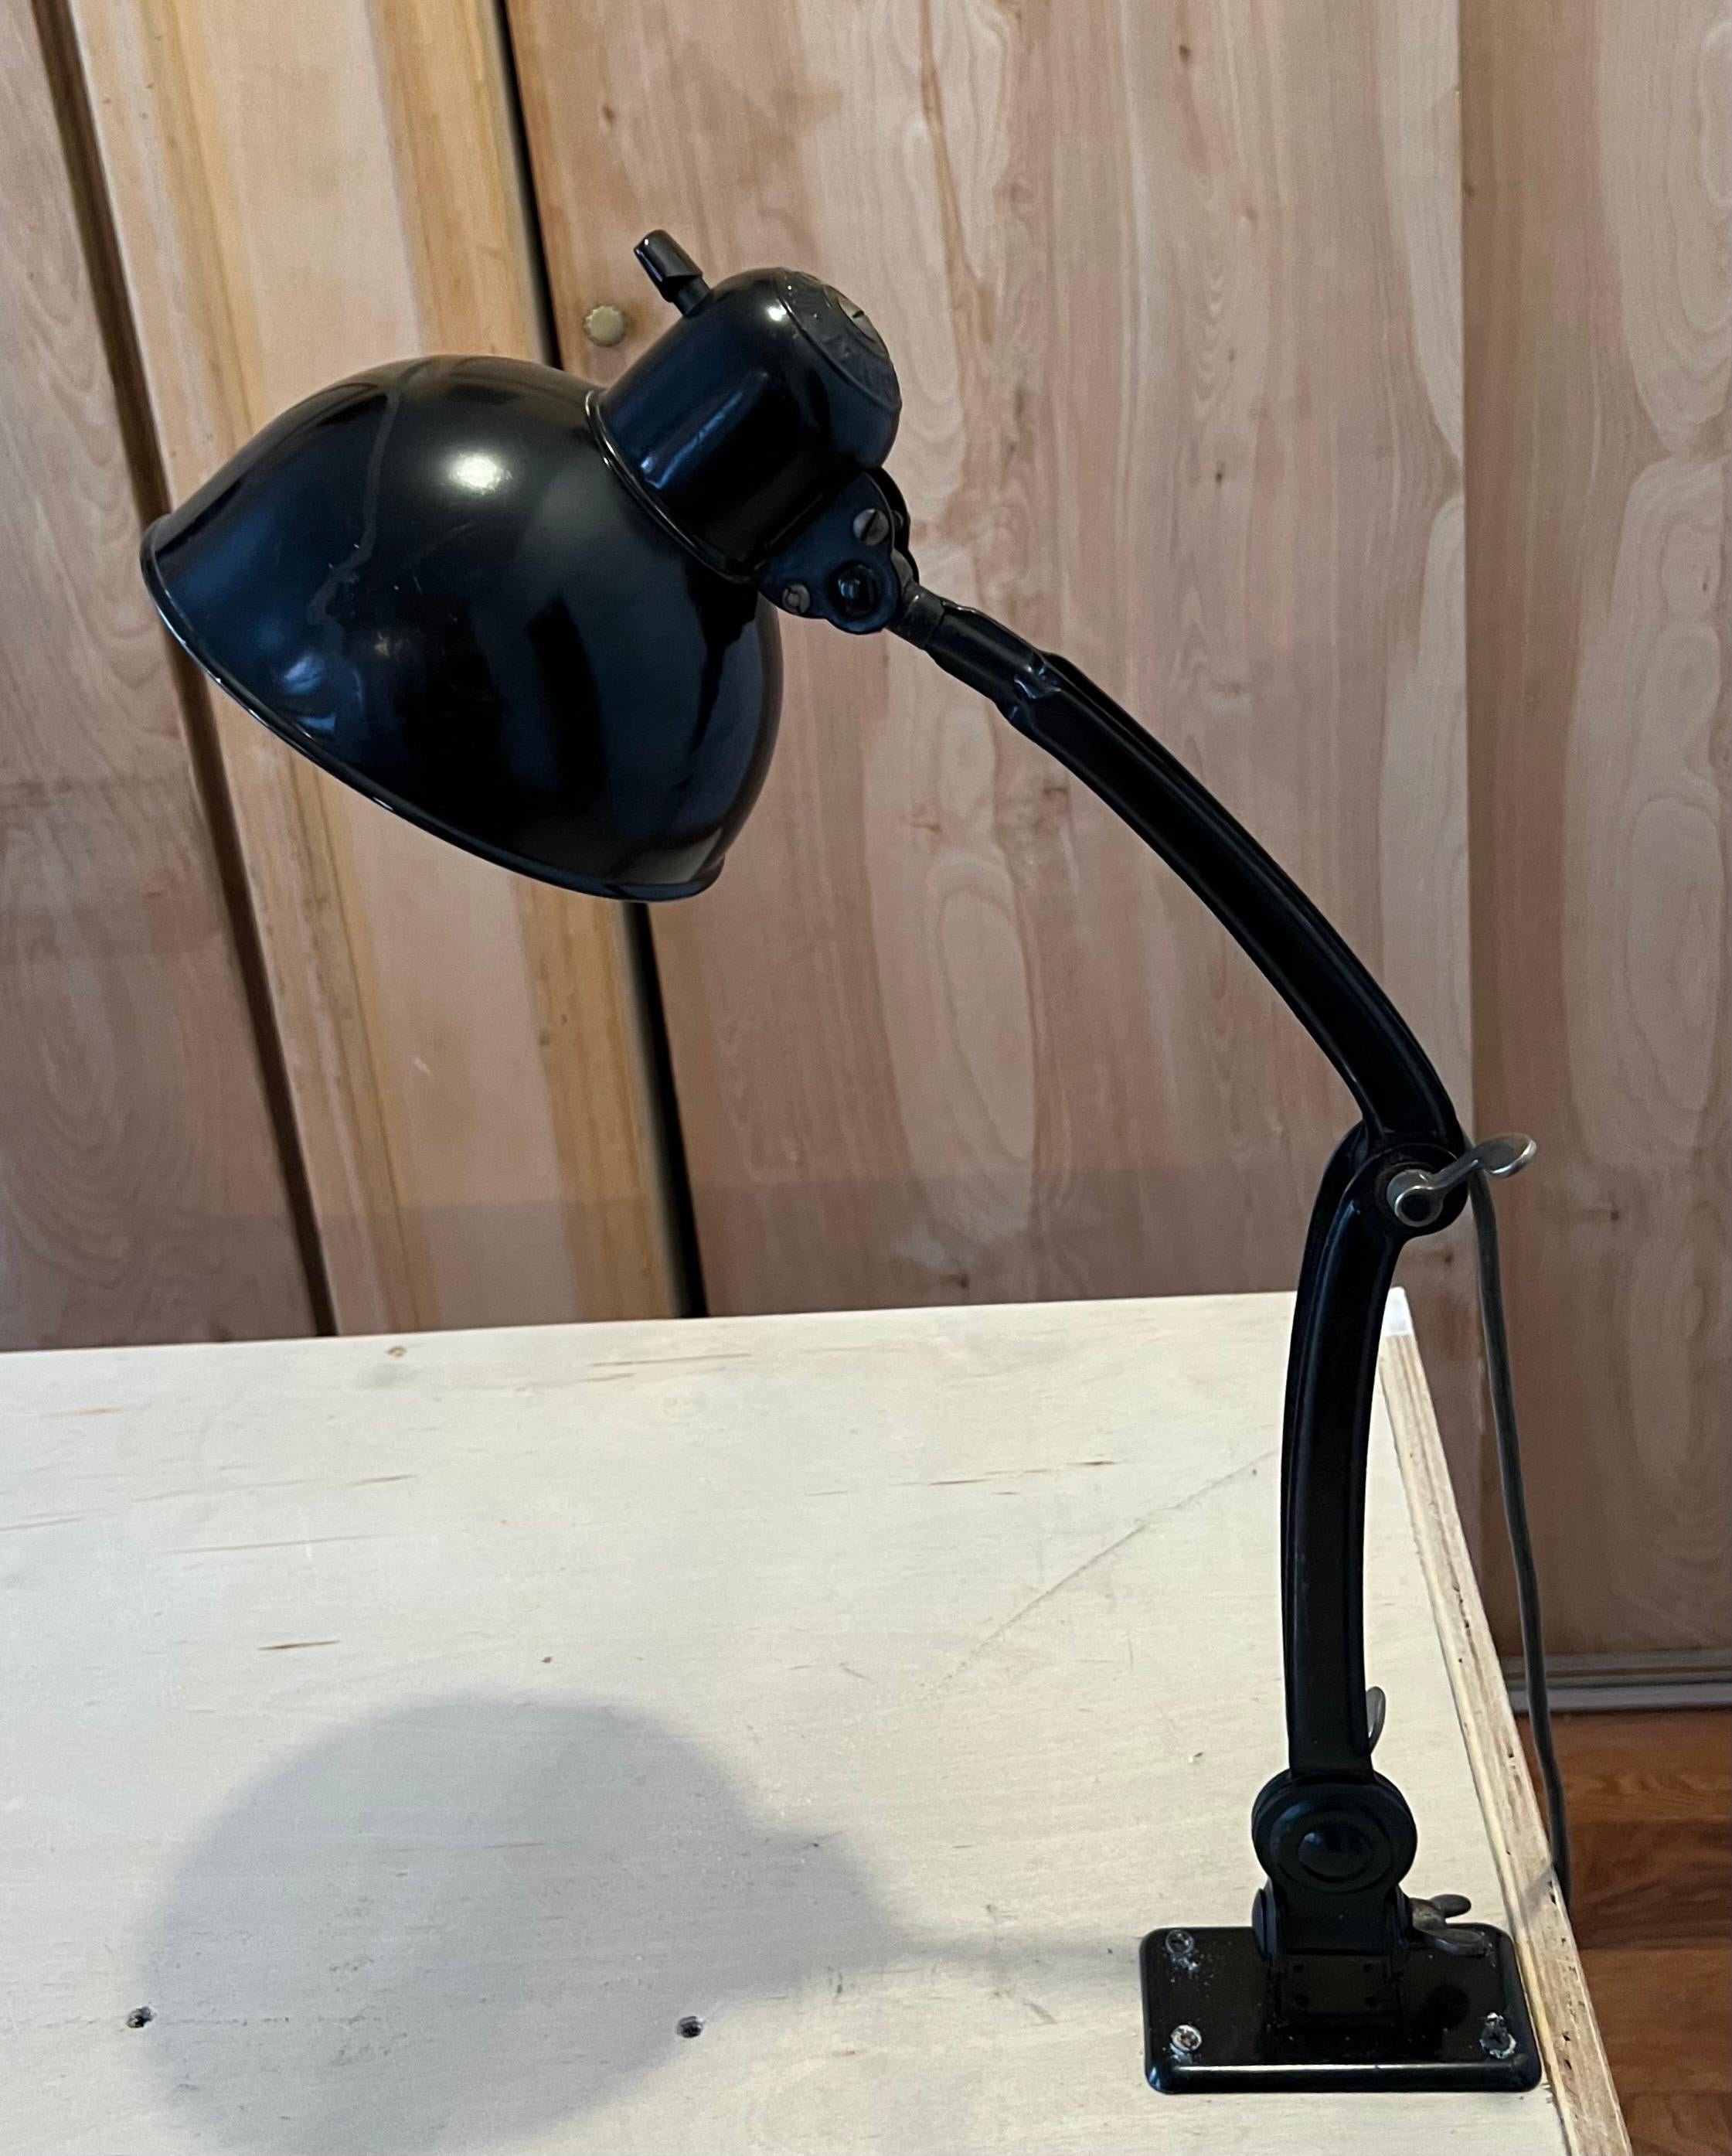 Early German Modernist / Bauhaus clamp lamp for desk, table or wall, Model # 6716 by Christian Dell and manufactured by Kaiser Idell, circa 1930. A timeless work of industrial design and art that still maintains its role in form and function today.